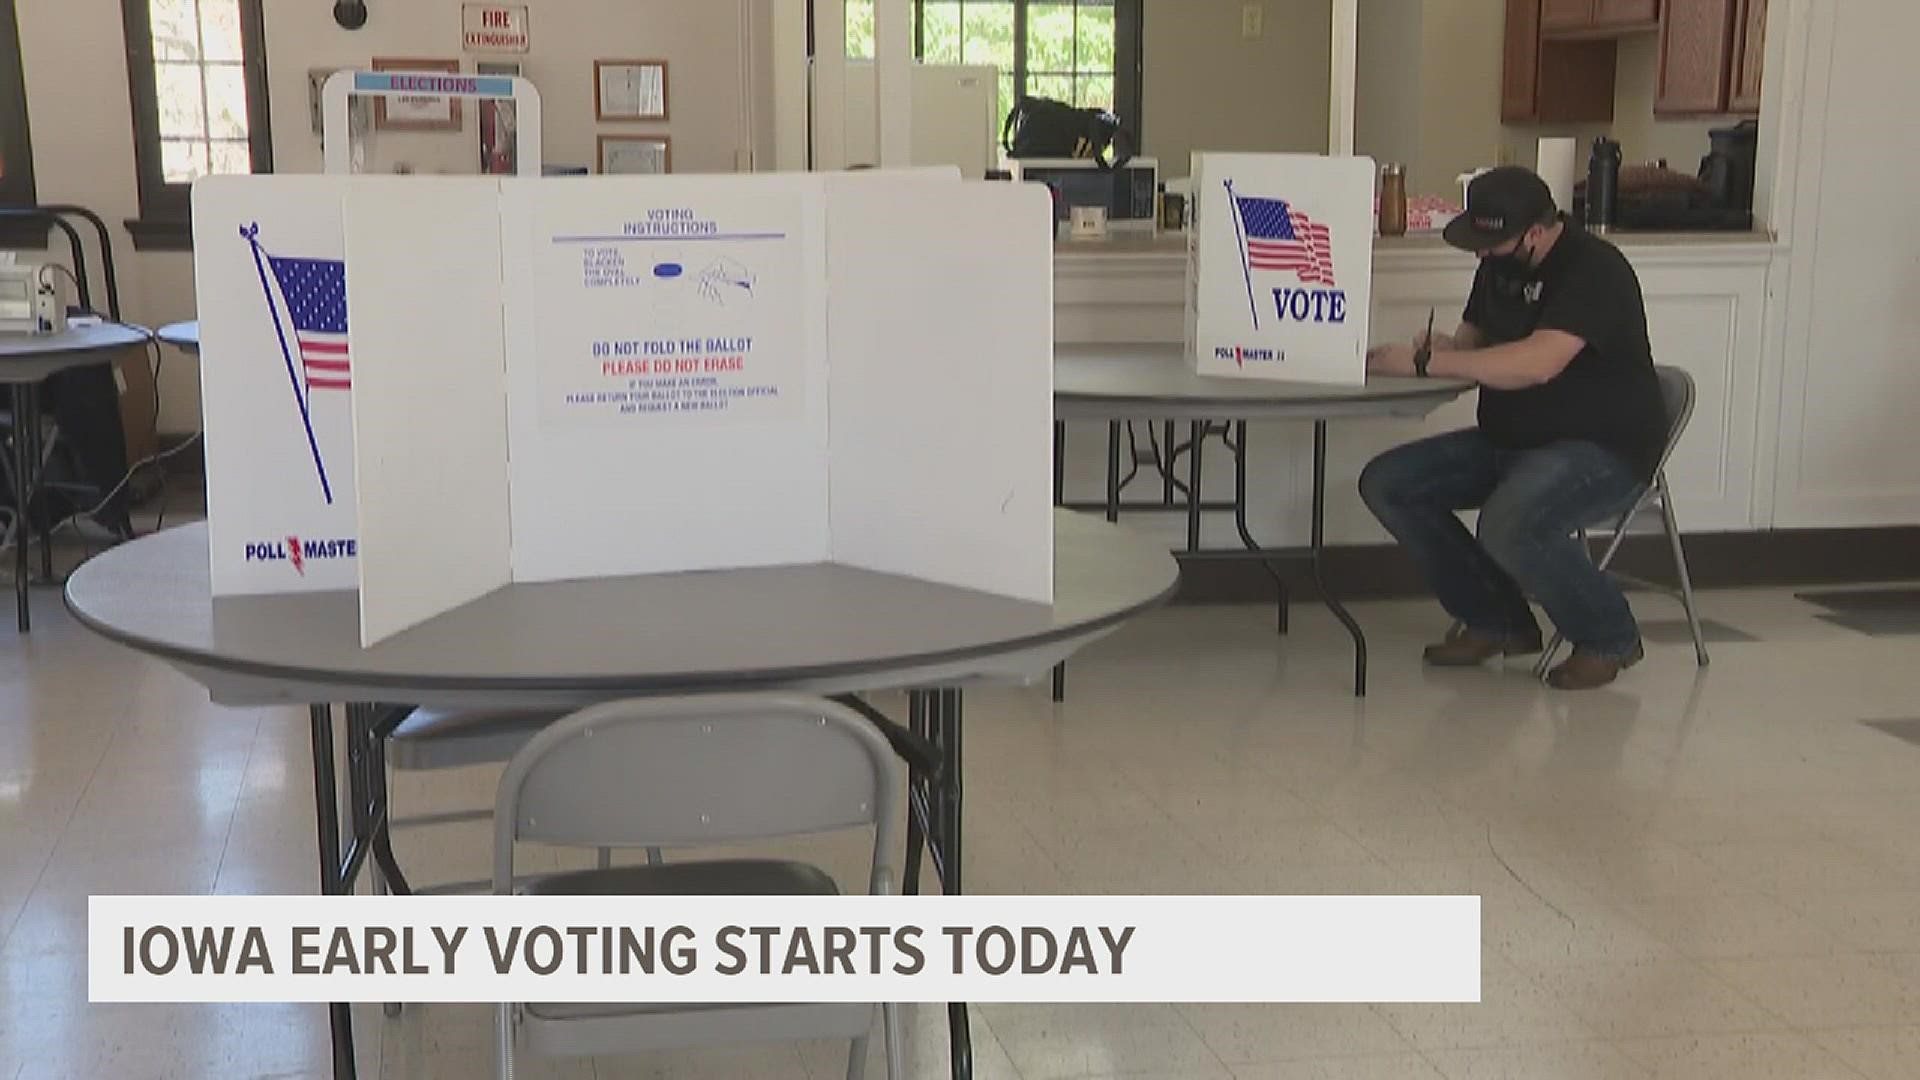 Iowa's primary election is June 7. This year, Scott County will open six satellite voting sites to help voters cast their ballots.